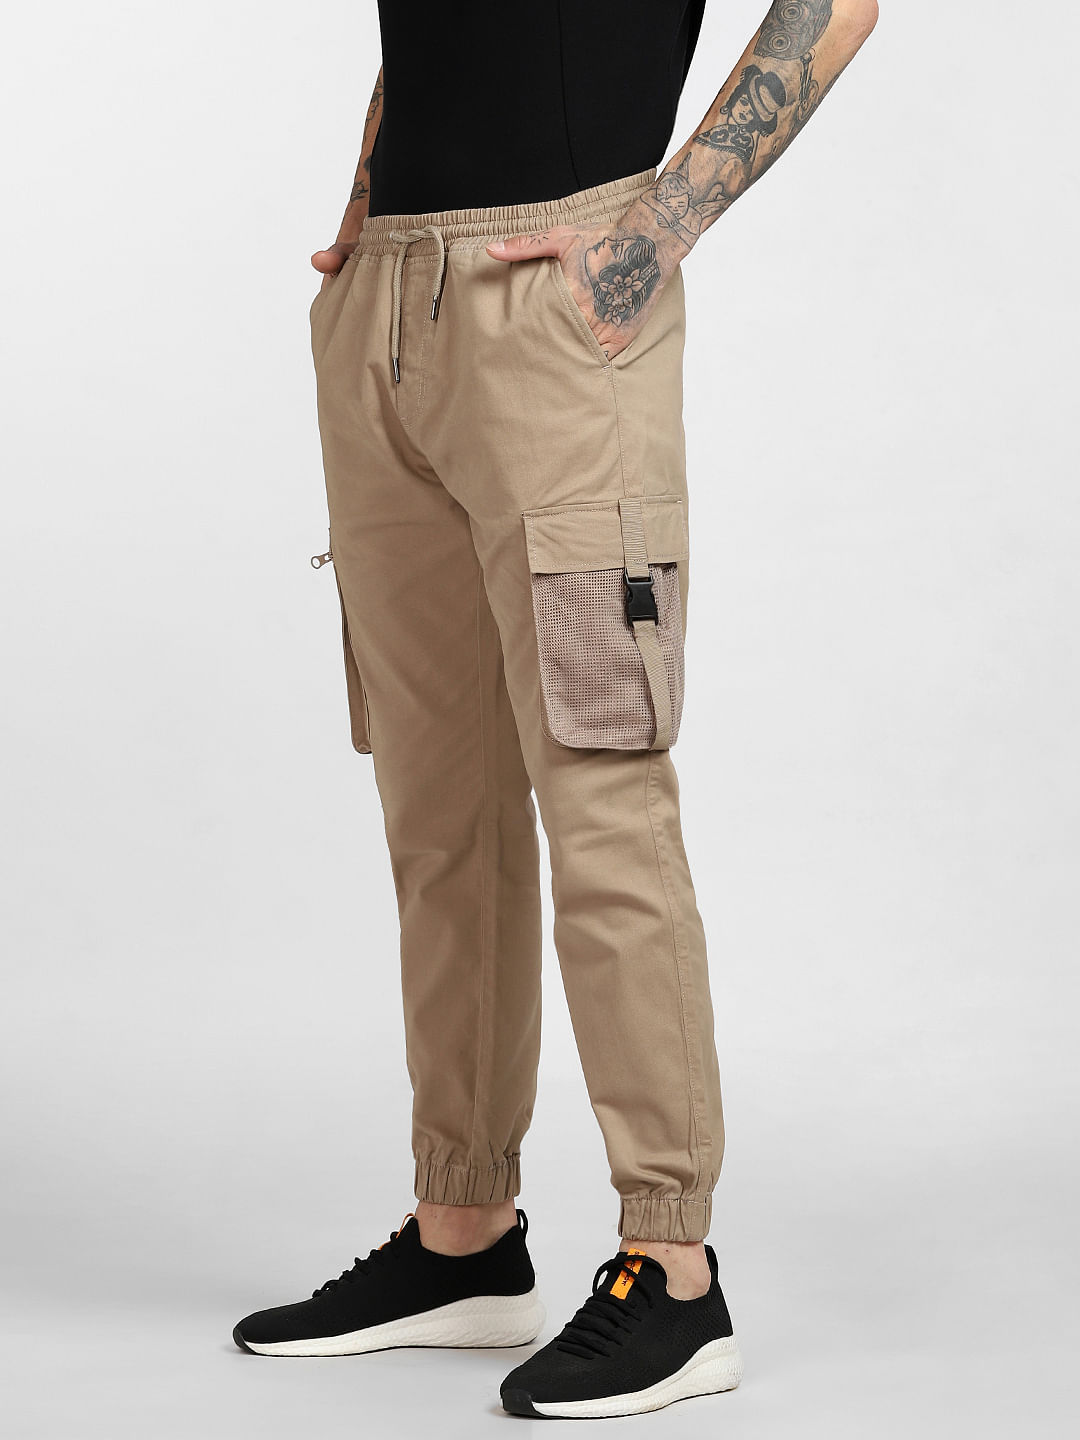 Buy Indian Terrain Olive Slim Fit Cargo Pants from top Brands at Best  Prices Online in India  Tata CLiQ